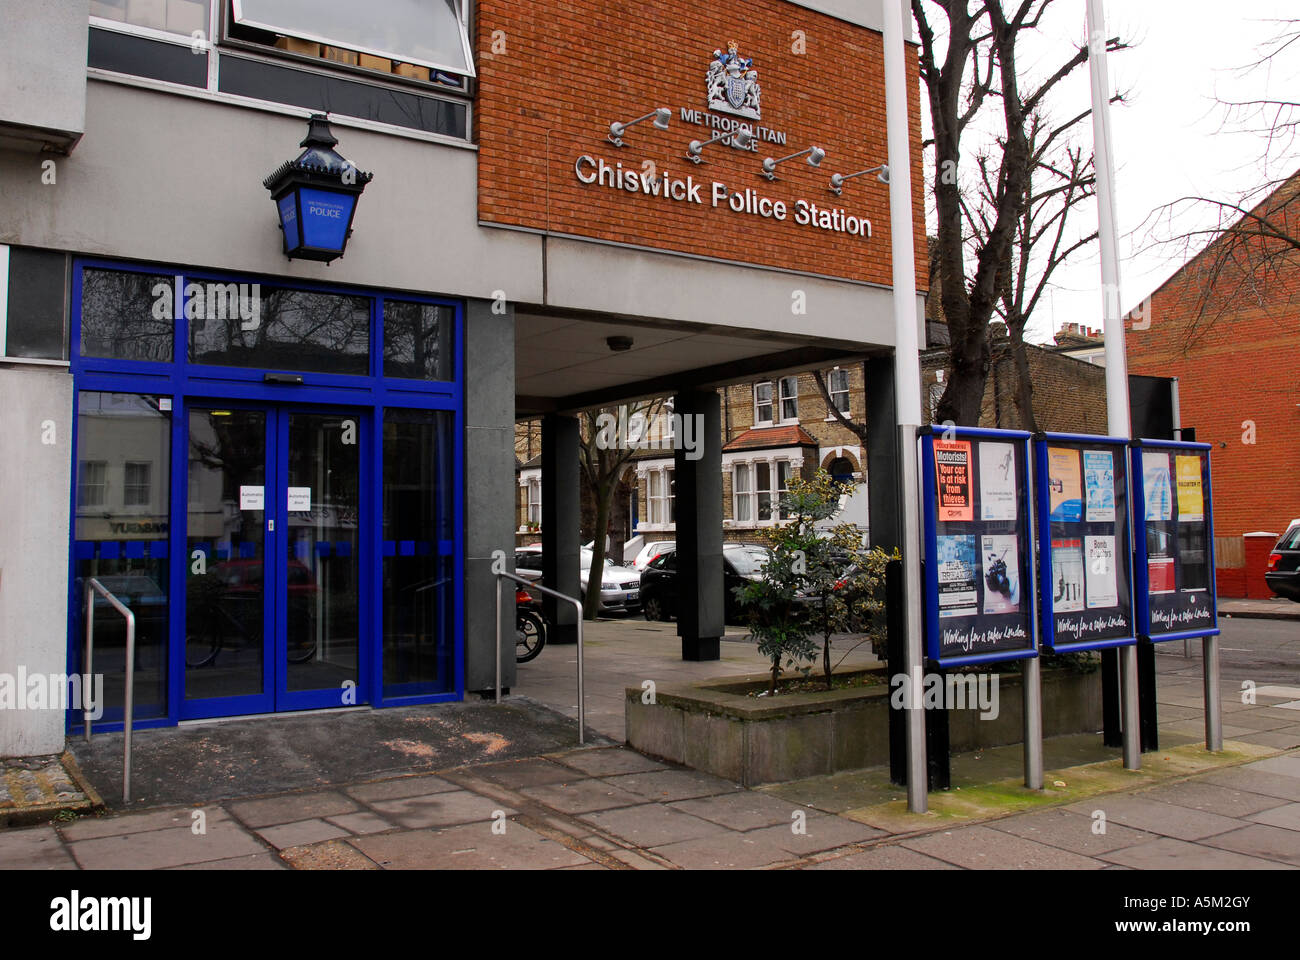 General view of Chiswick Police Station, Chiswick, west London, UK. Stock Photo